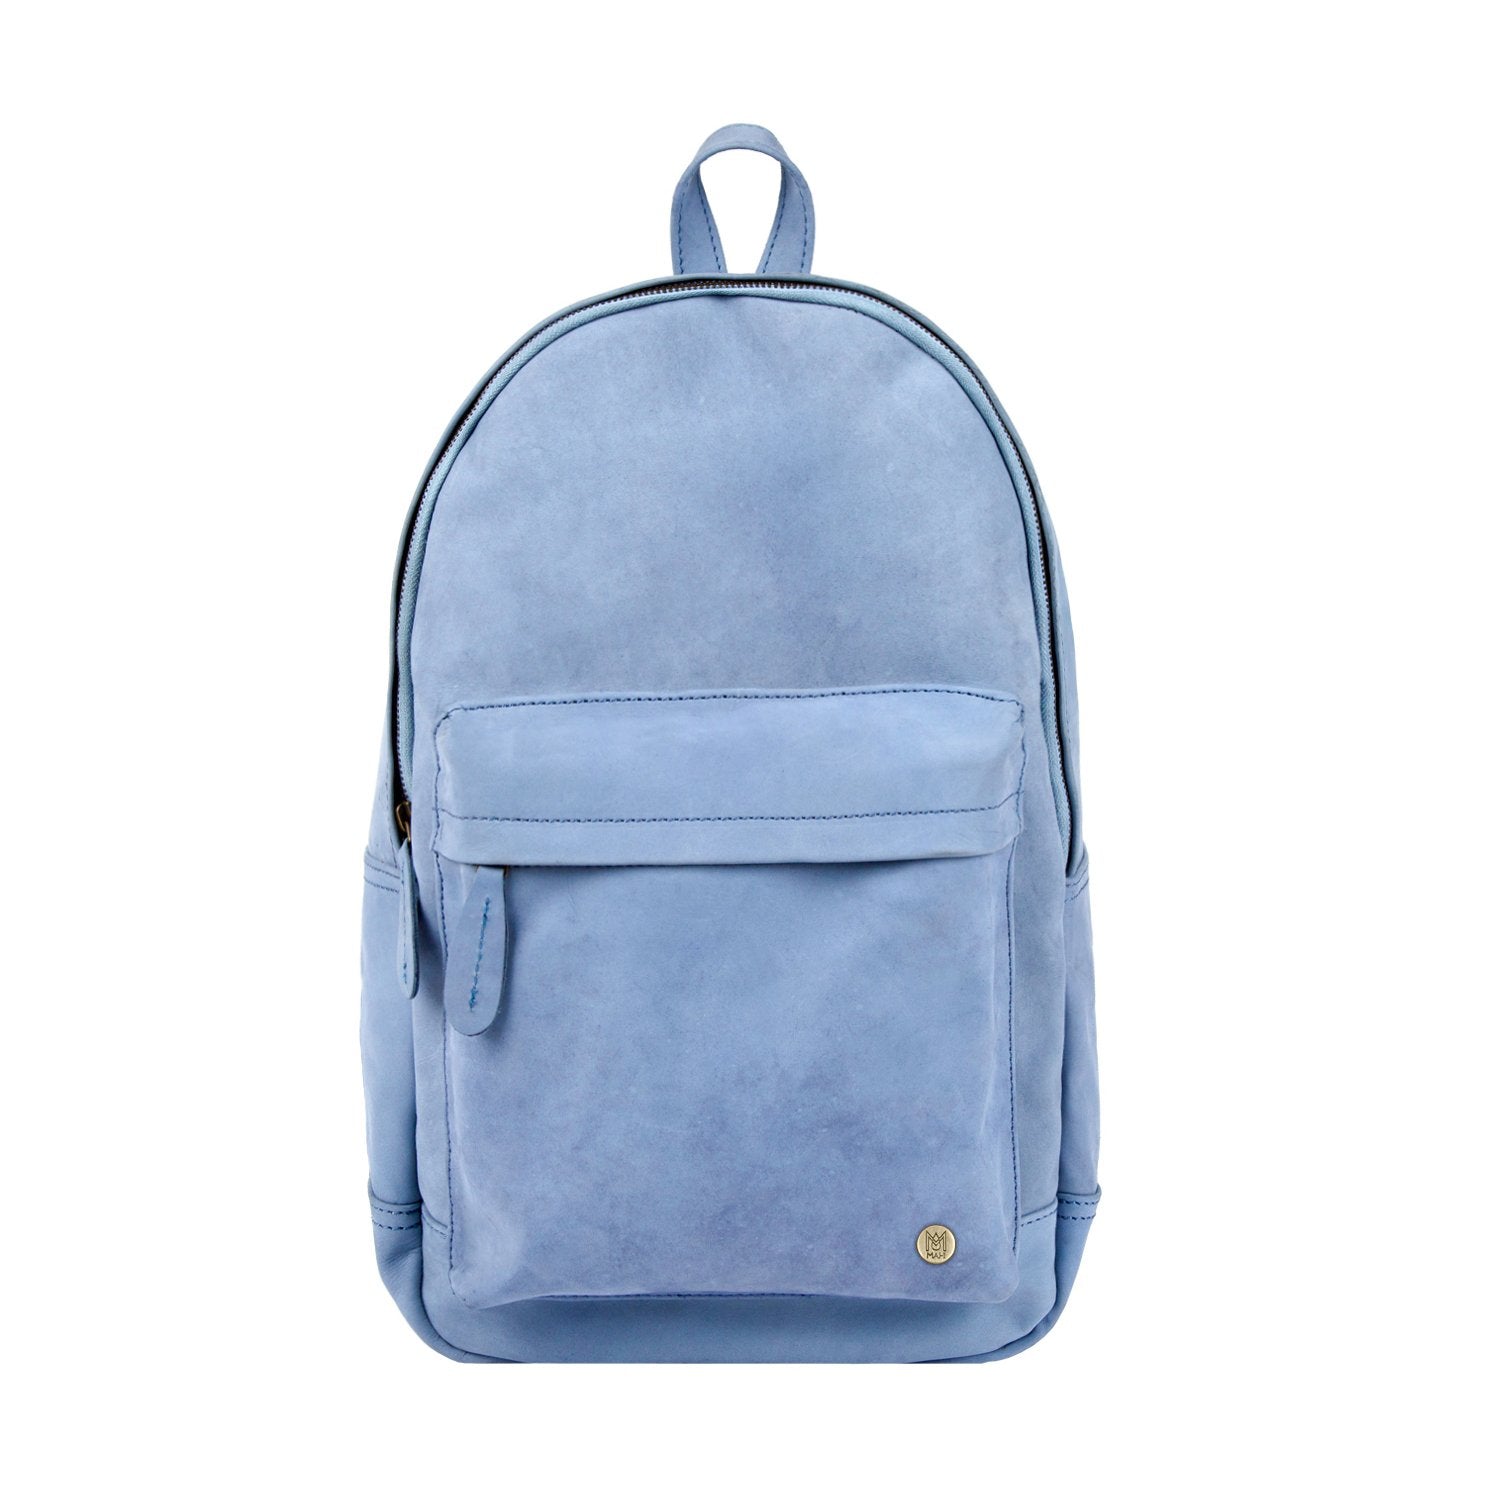 Blue Suede Leather Backpack for Work, School, or College – MAHI Leather